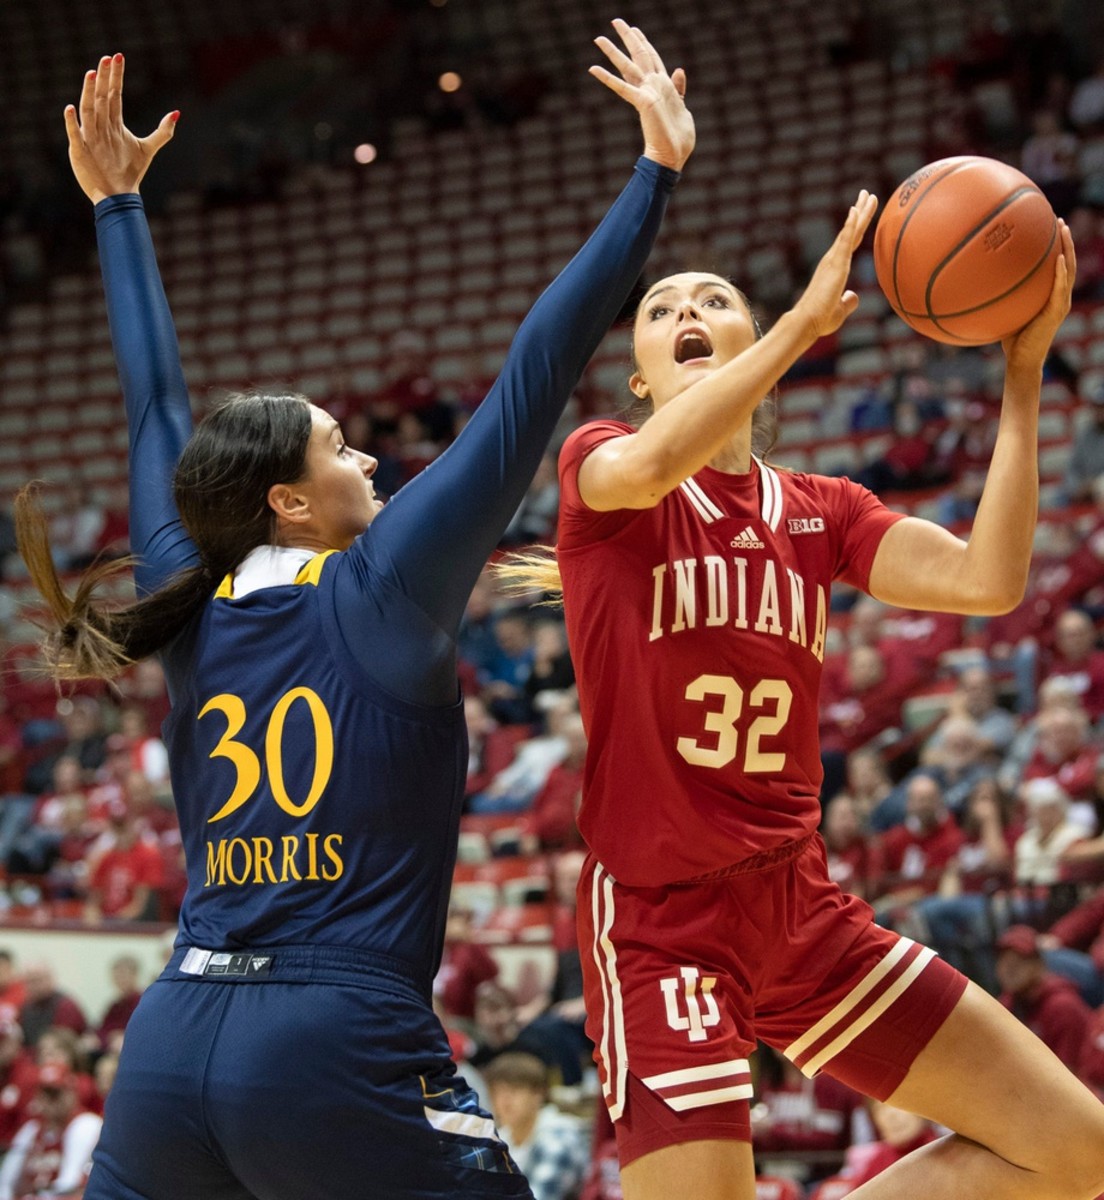 Indiana's Alyssa Geary (32) scores over Quinnipiac's Mikala Morris (30) during the Indiana versus Quinnipiac women's basketball game at Simon Skjodt Assembly Hall on Sunday, Nov. 20, 2022.